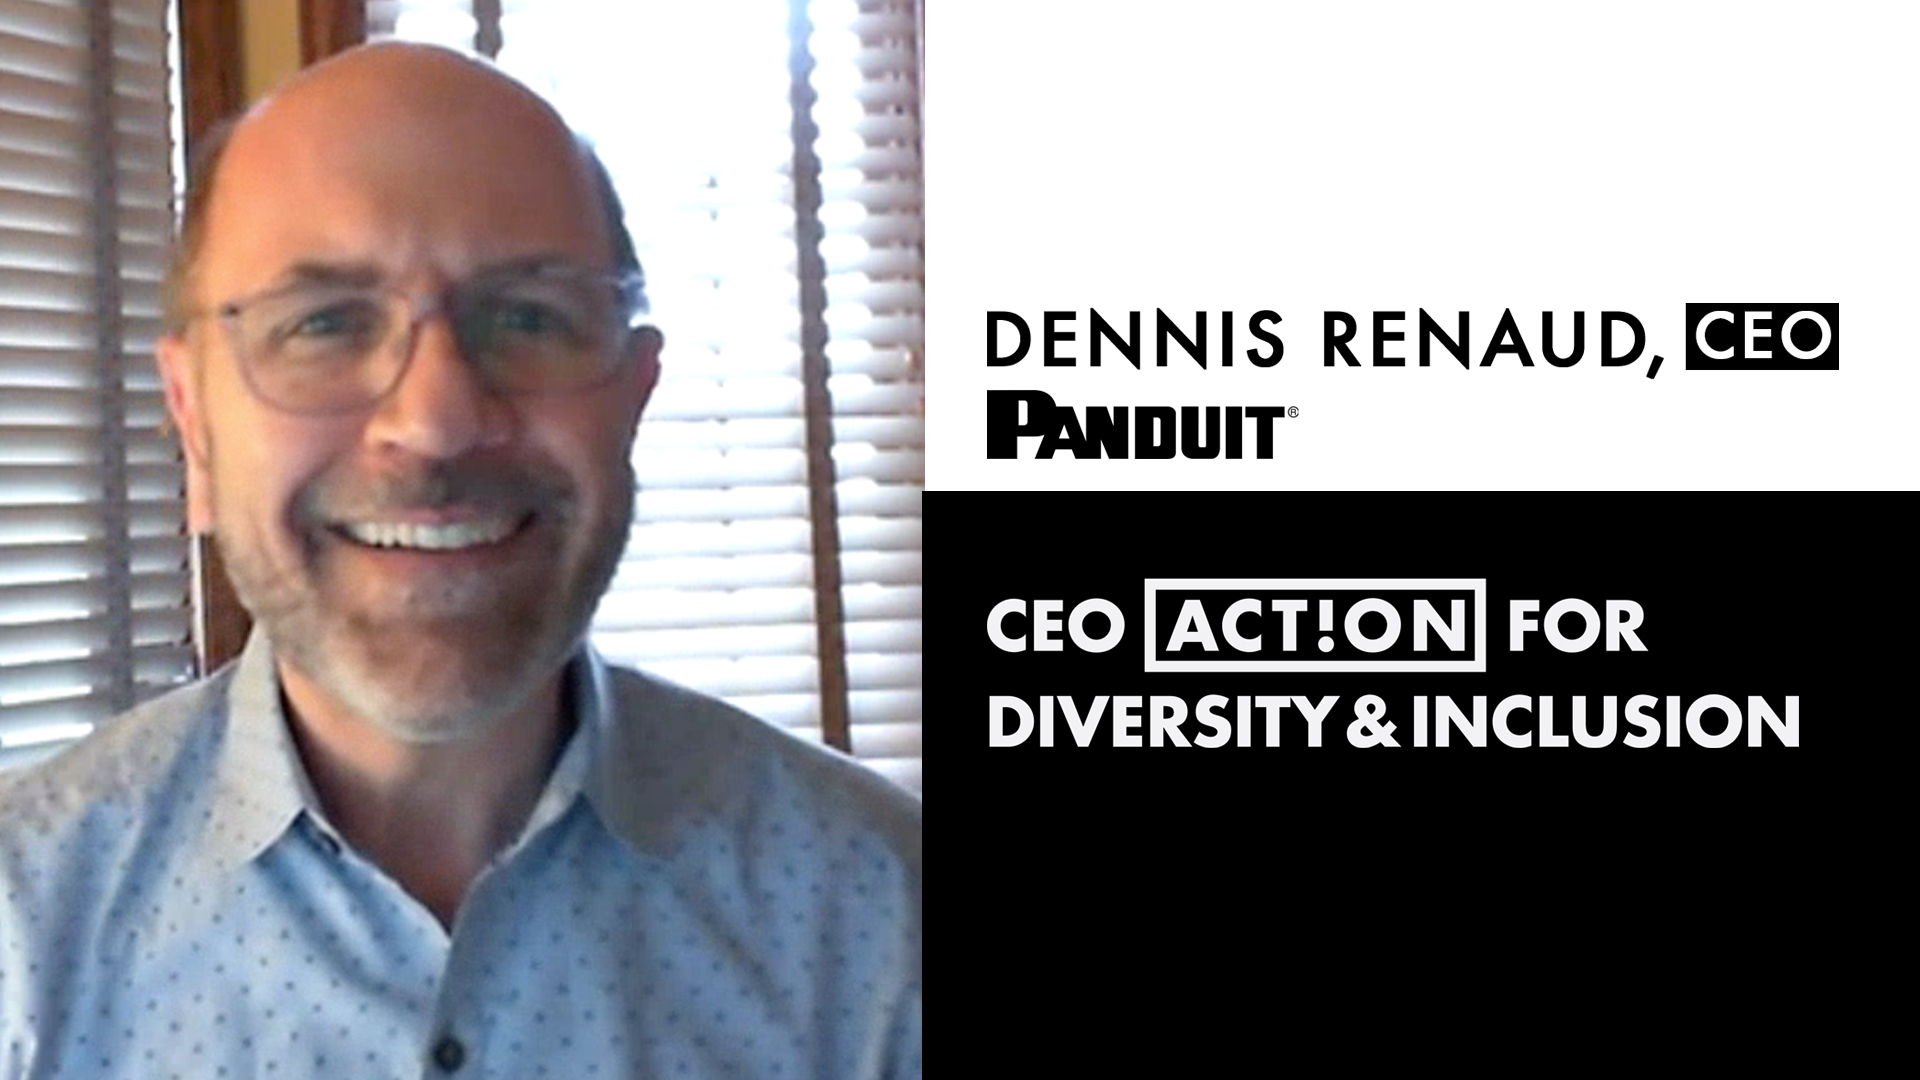 Panduit CEO Dennis Renaud smiling and words CEO Action for Diversity & Inclusion to the right of him